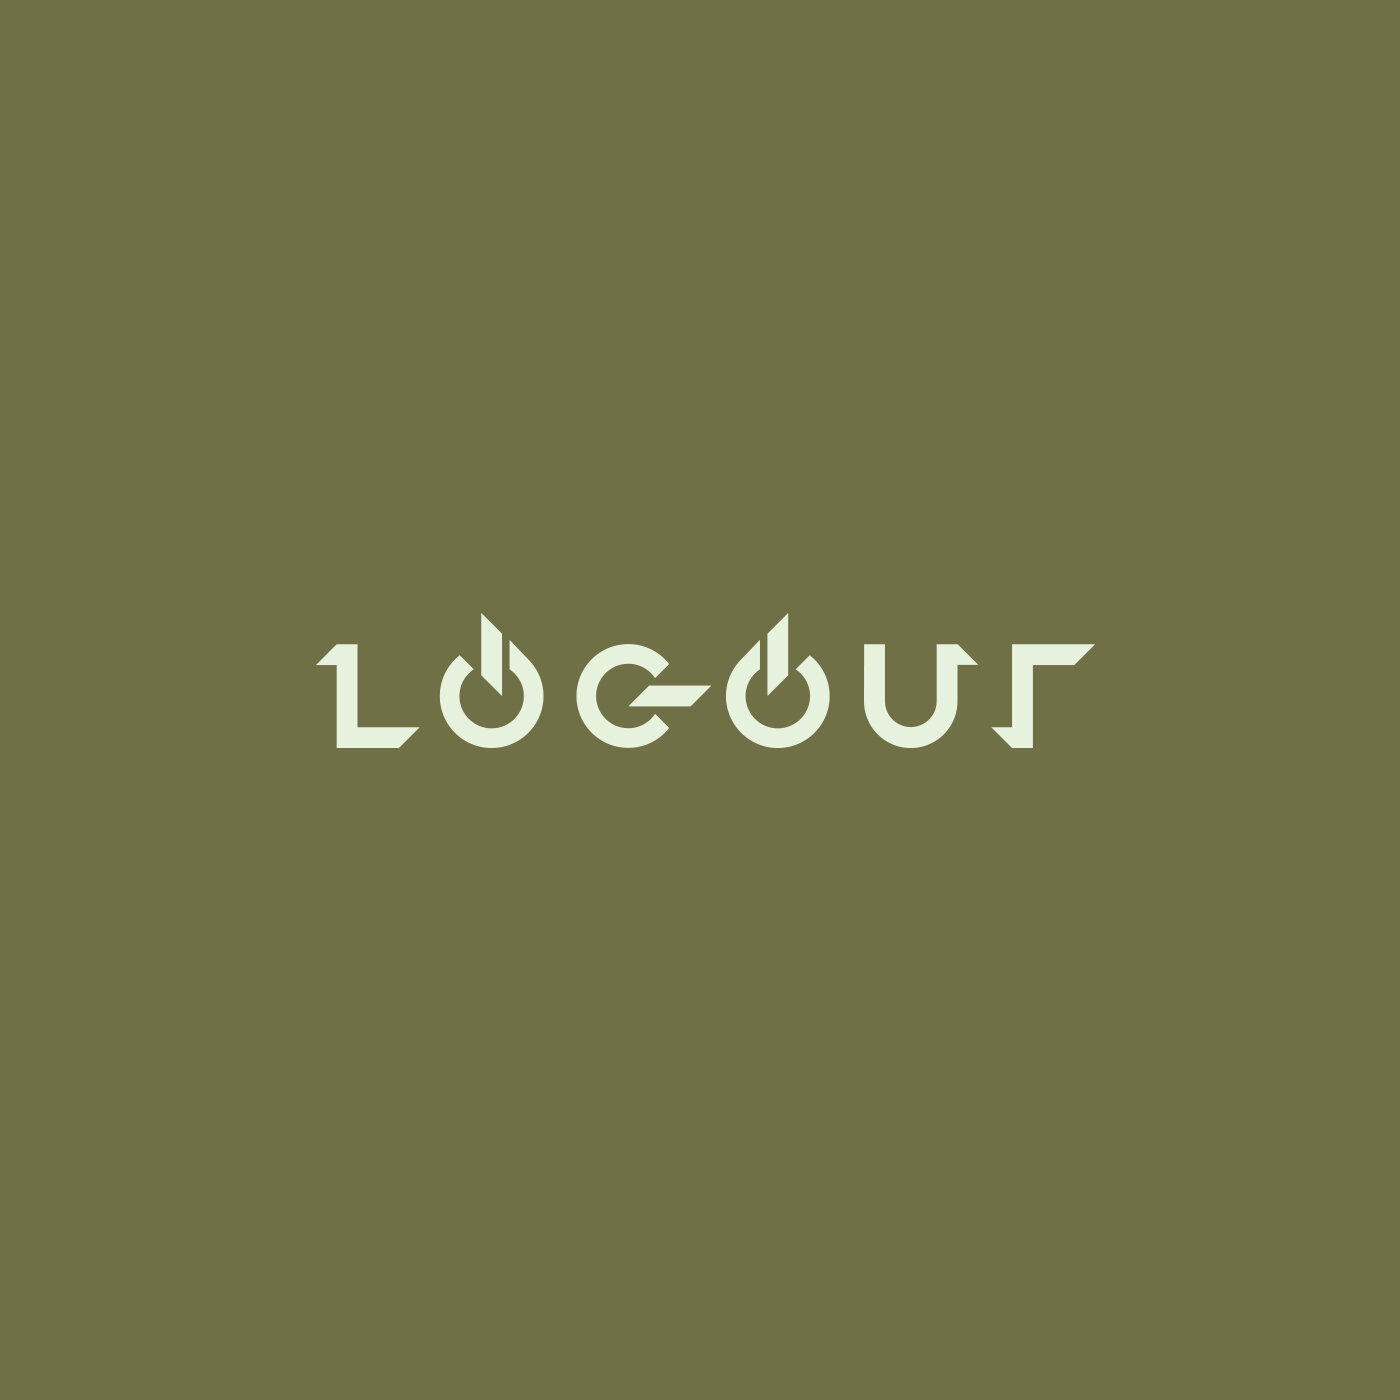 logo_logout_musik_by_andre_levy_zhion.jpg